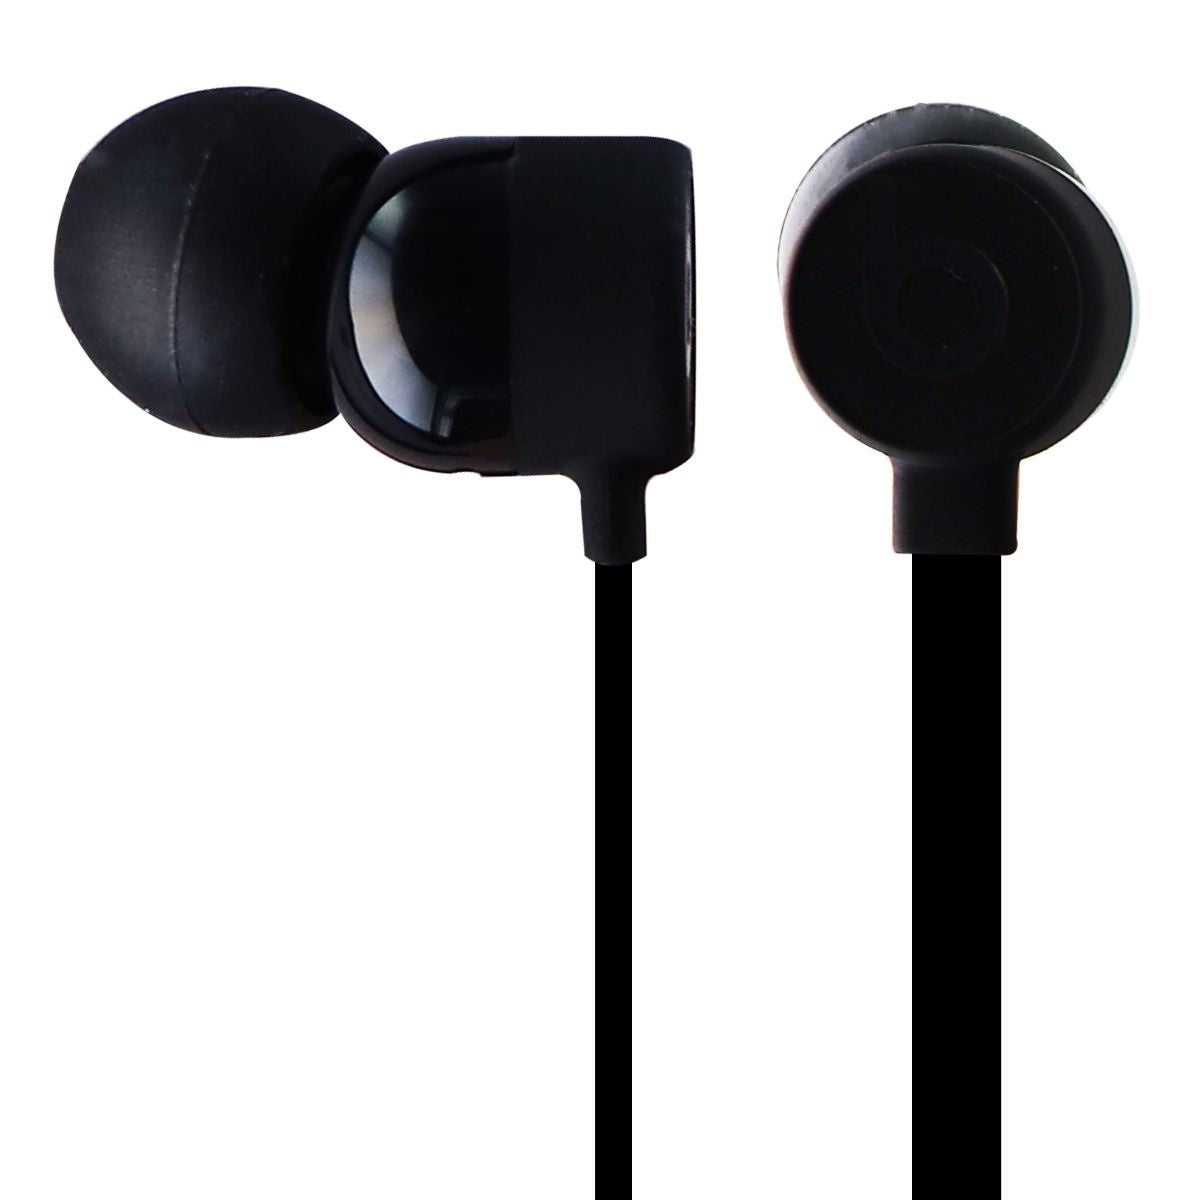 Beats by Dre. Dre urBeats3 Earphones with 3.5mm Plug - Black (MU982LL/A) Portable Audio - Headphones Beats by Dr. Dre    - Simple Cell Bulk Wholesale Pricing - USA Seller